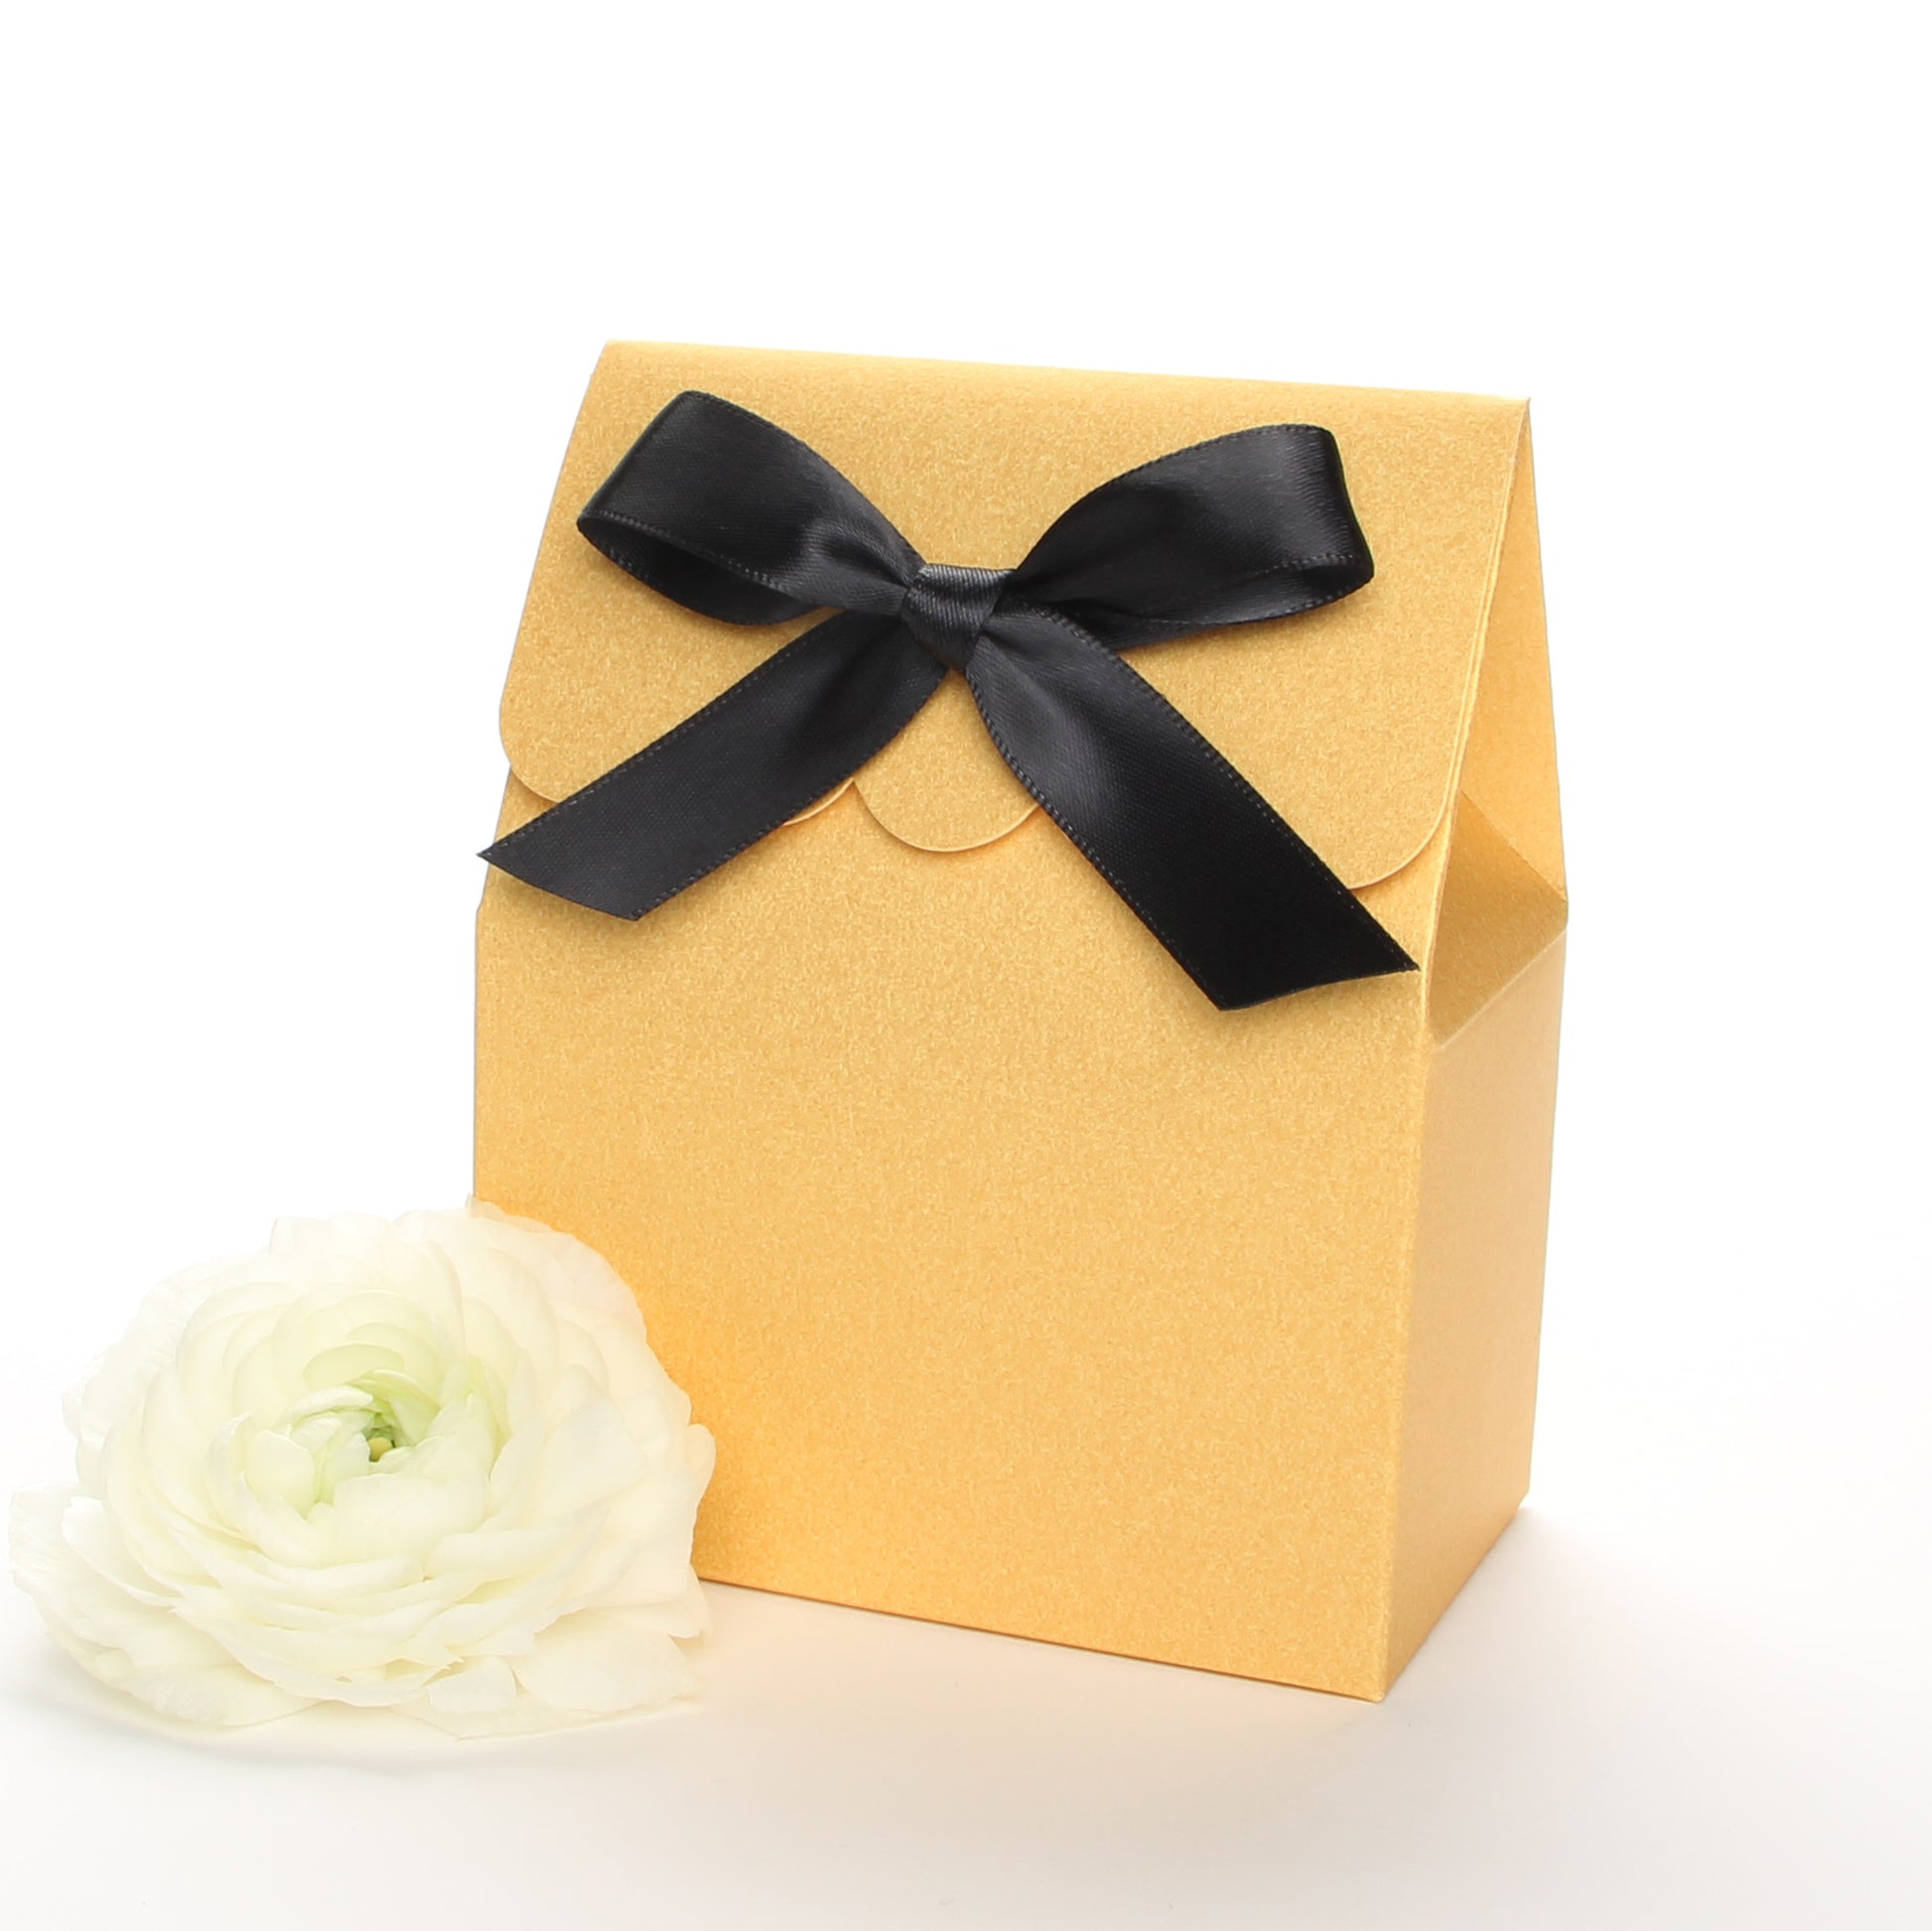 Lux Party’s gold favor box with a scalloped edge and a black satin bow next to white ranunculus flowers.